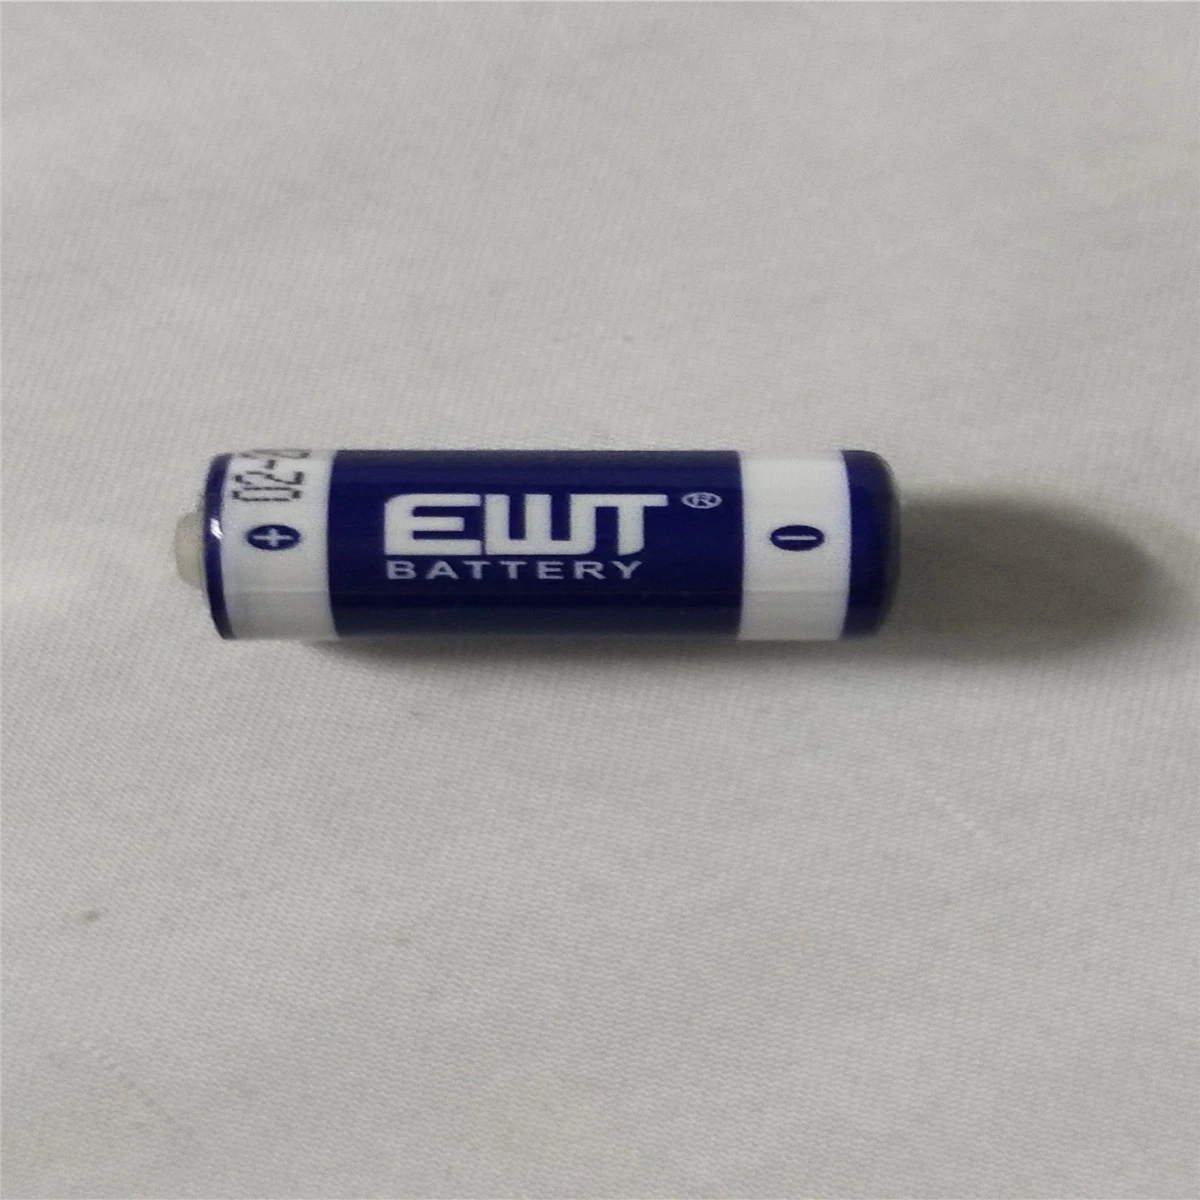 Li-socl2 Power Type Primary Lithium Battery 1/2AA Er14250 3.6v 1200mah for medical device